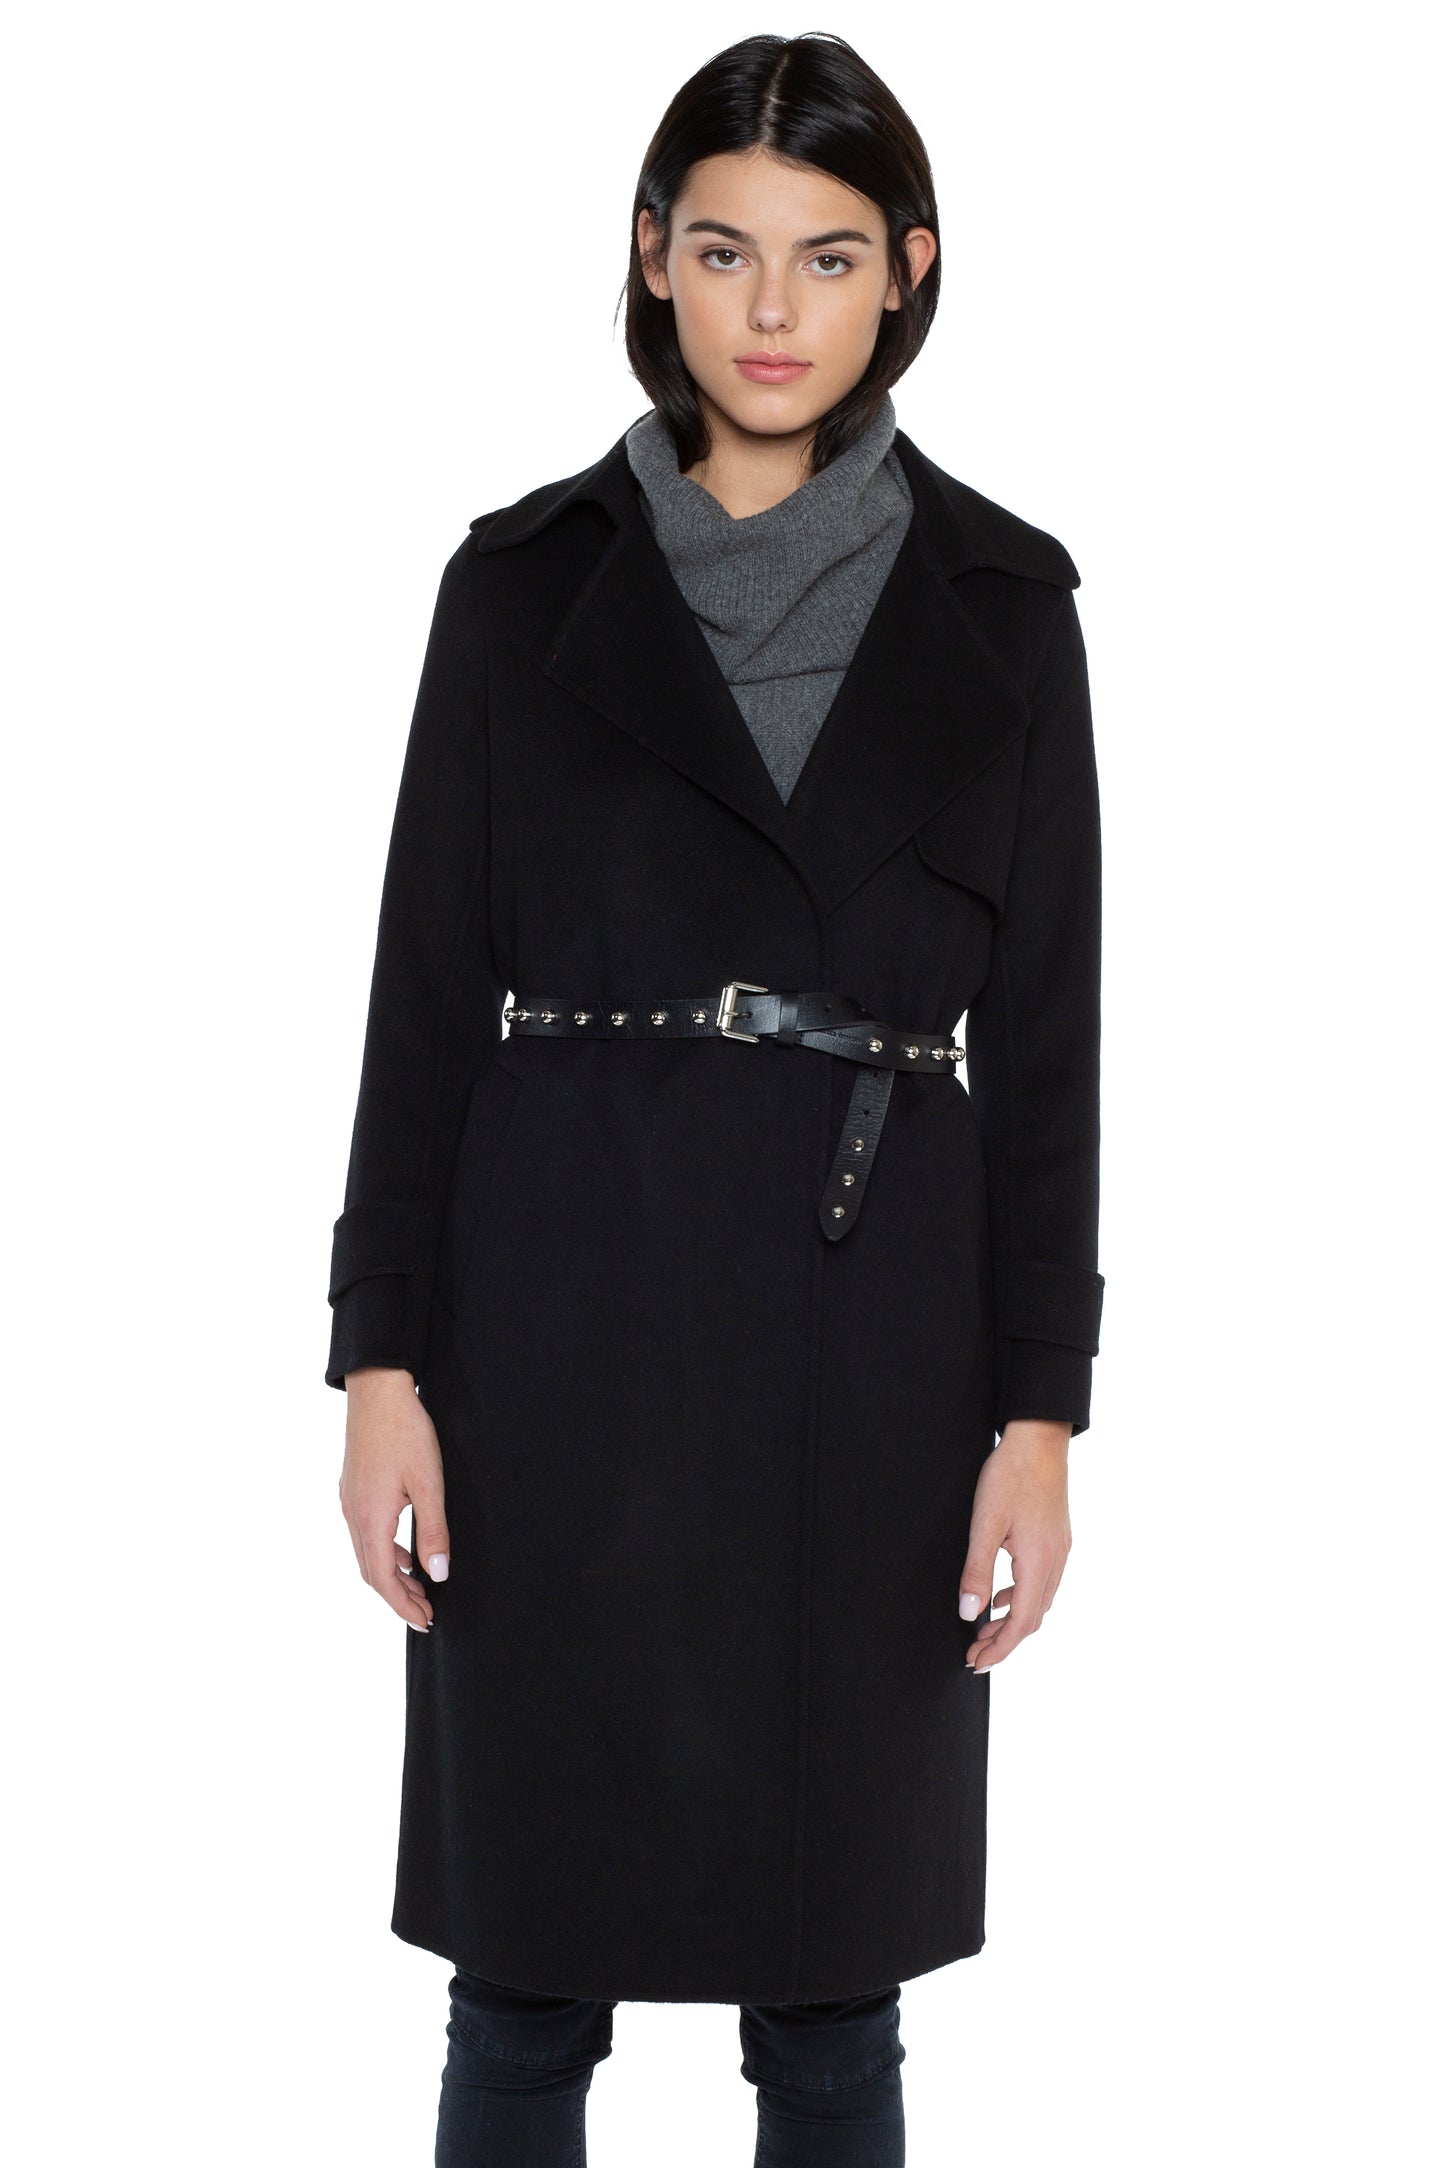 JENNIE LIU WOMEN'S CASHMERE WOOL DOUBLE-FACED TRENCH COAT